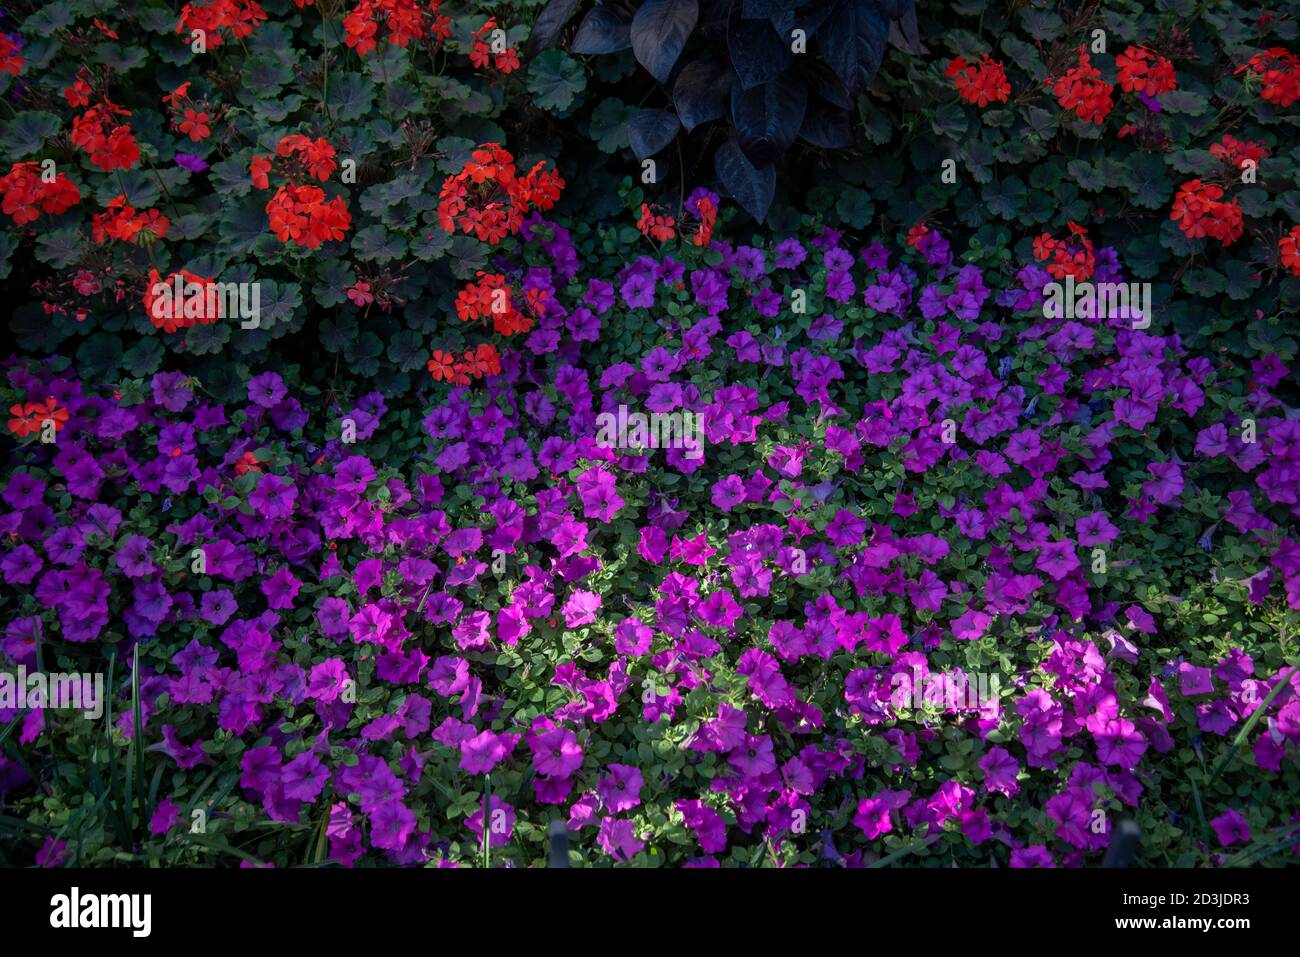 Bed of purple petunias catches the afternoon light, R Street NW, Washington, DC. Stock Photo